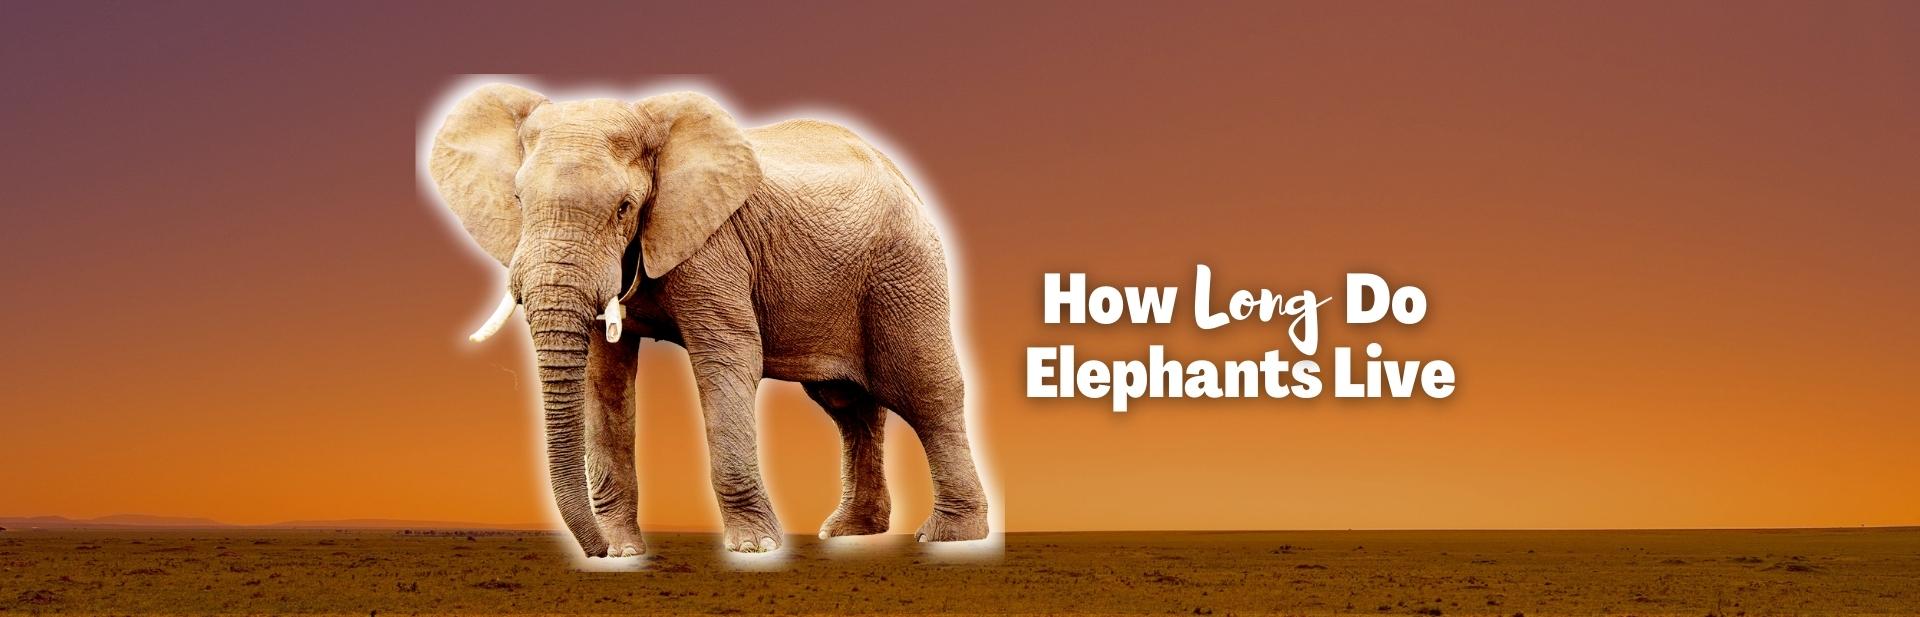 How Long Do Elephants Live & How Humans Factor In